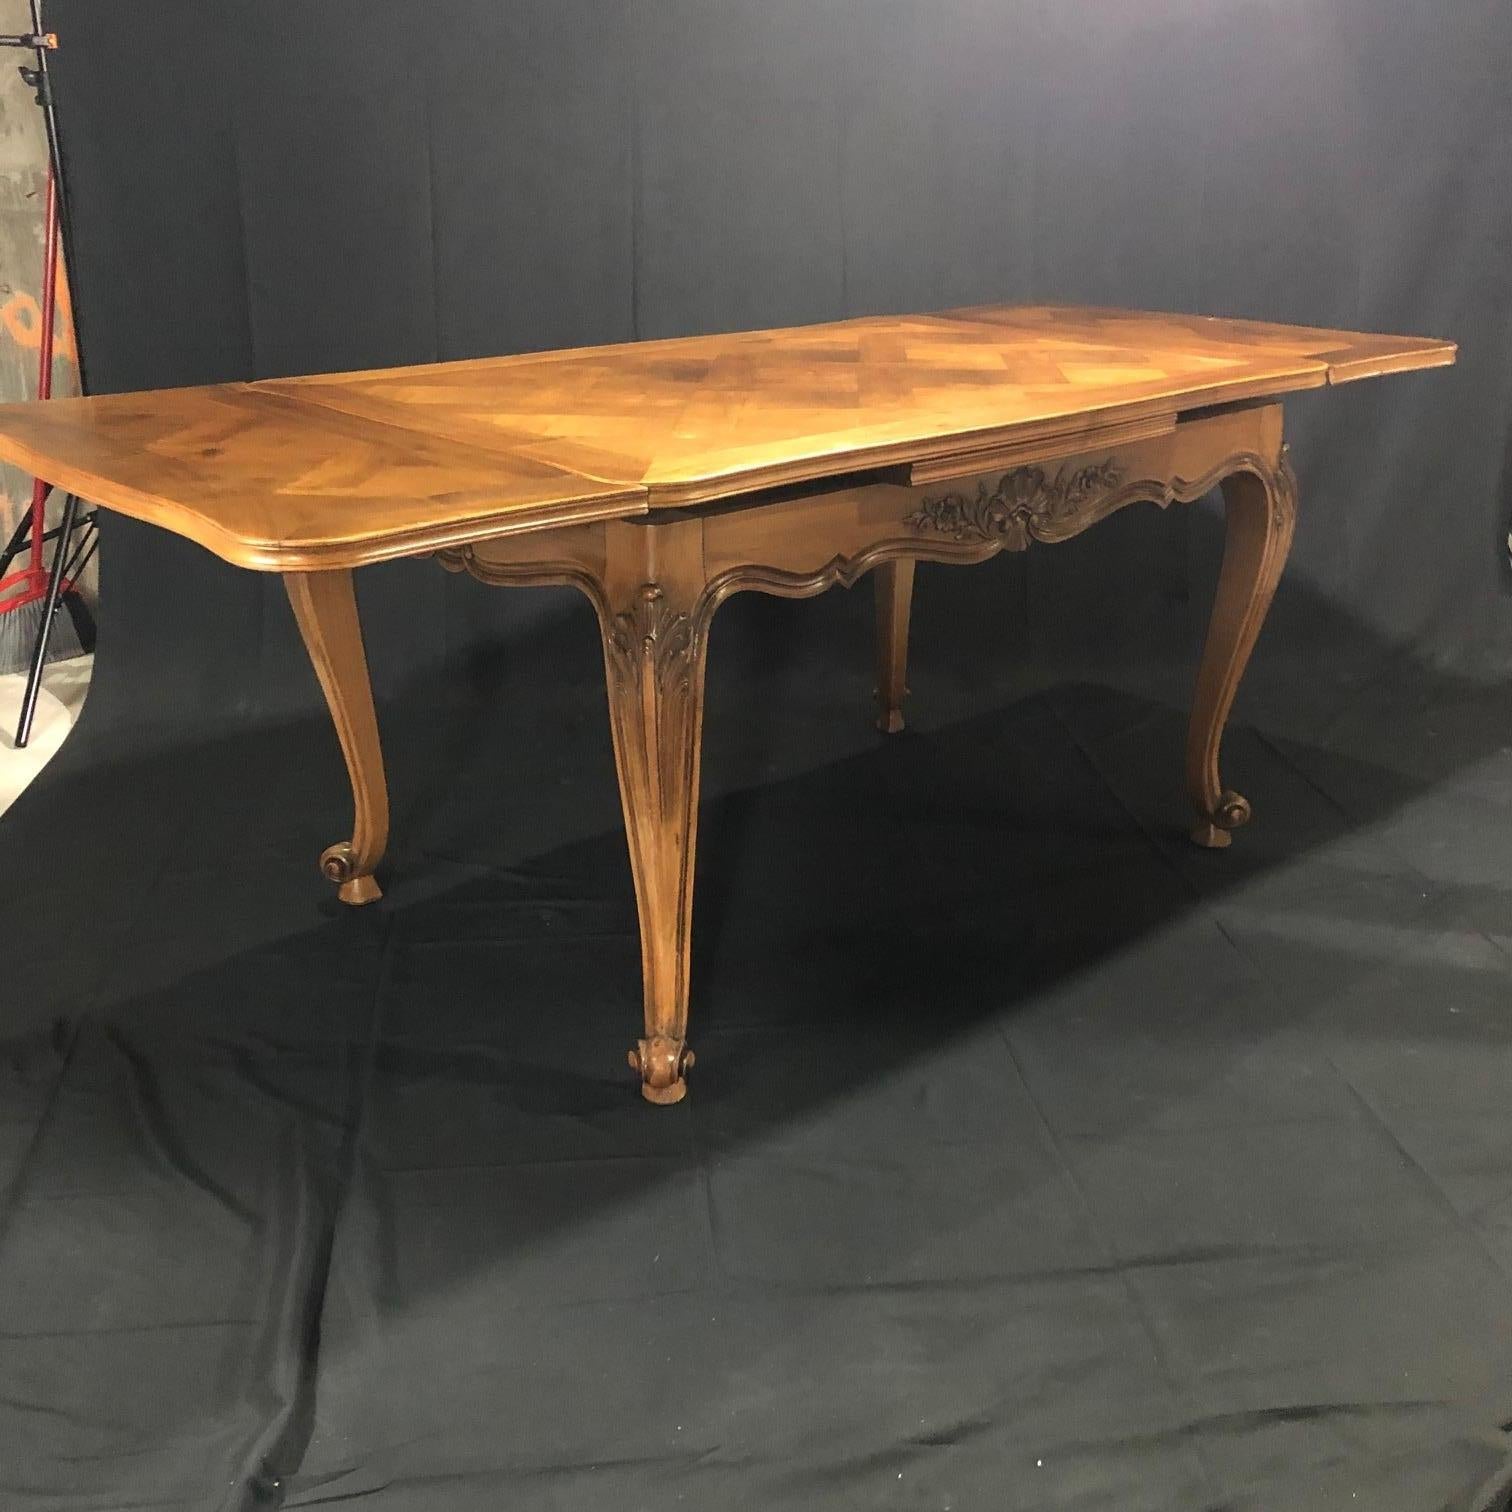 Spectacular carved French 19th century walnut country parquet inlay dining table with two draw leaves having wonderfully hand carved and scalloped apron with scrolls and flower baskets, cabriole legs with carved decorated acanthus leaves and